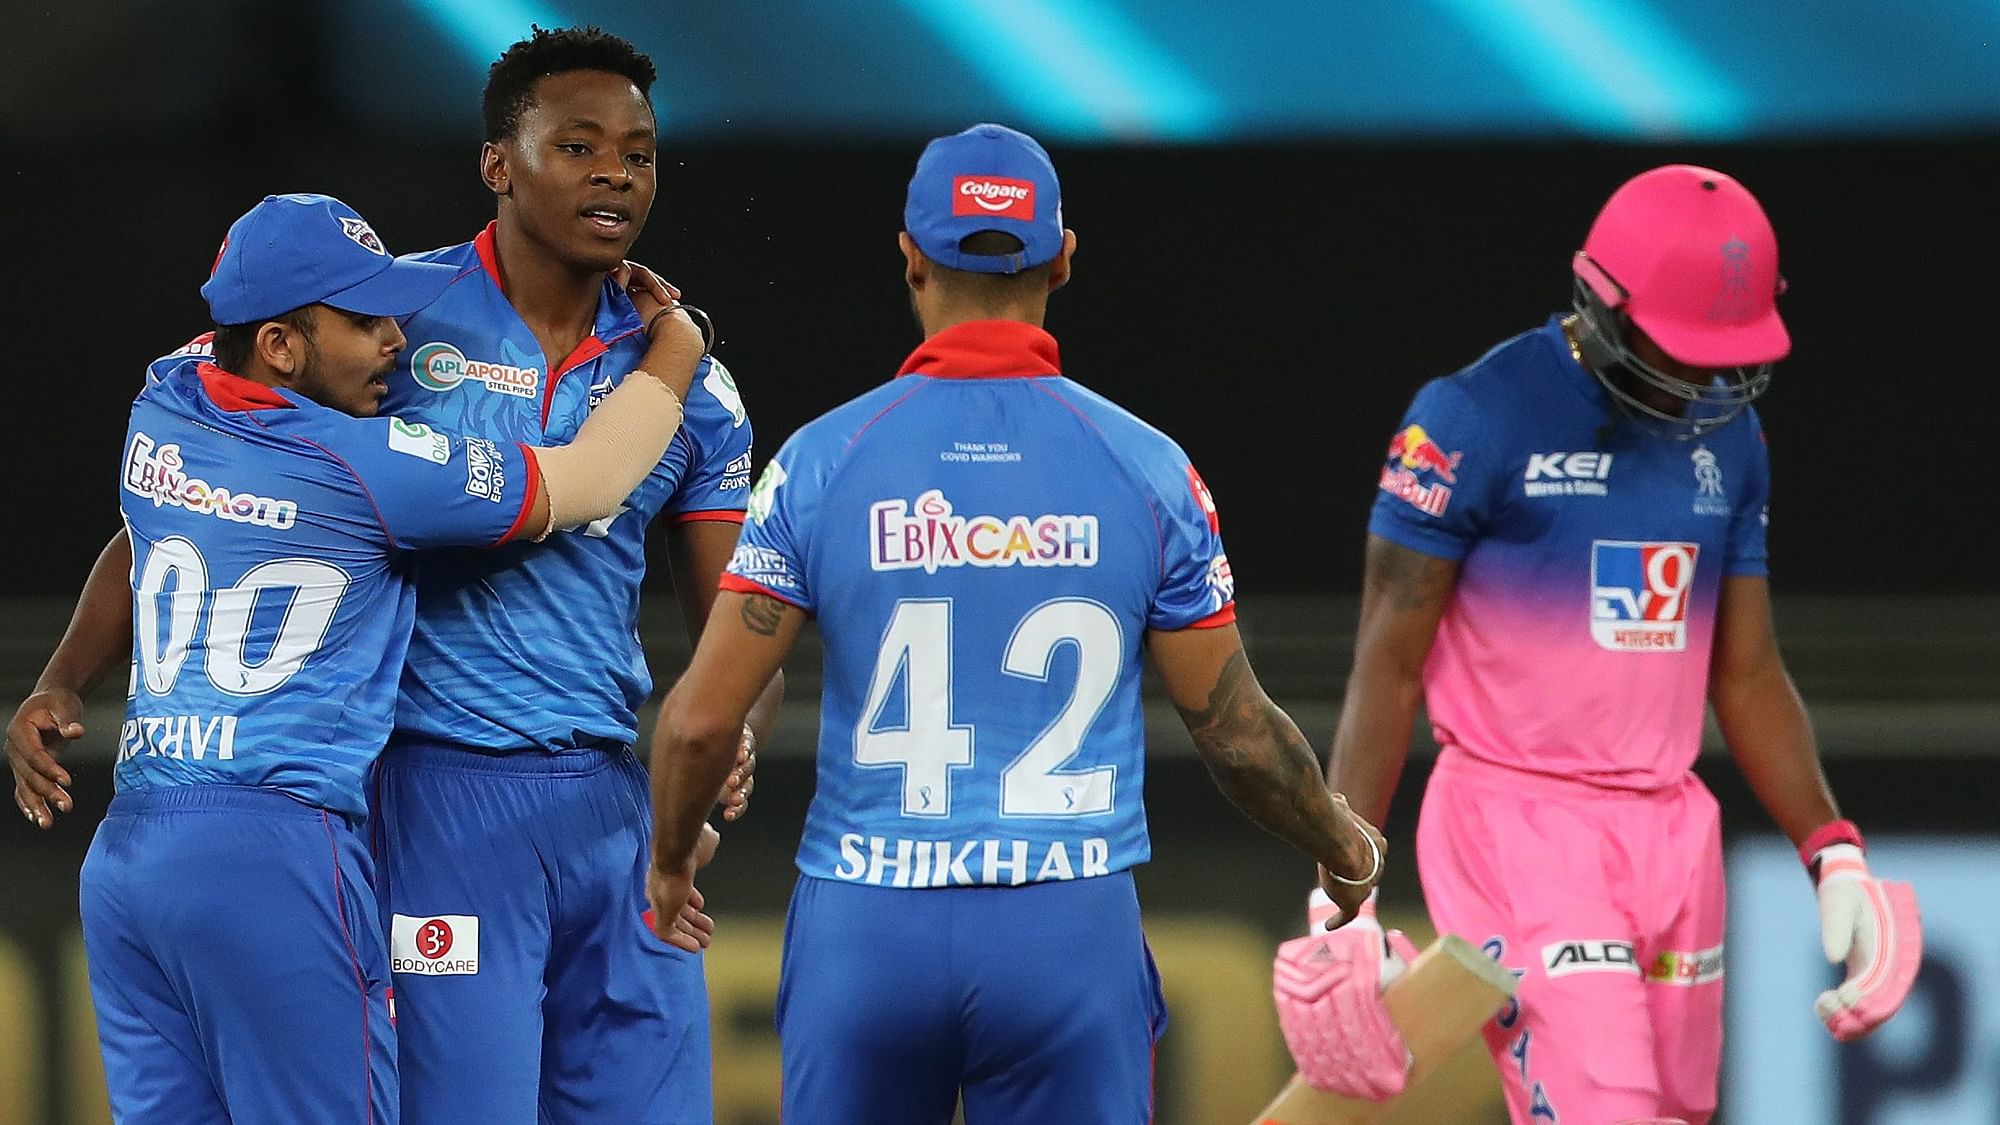 Delhi Capitals climbed back to the top of the points table after defeating Rajasthan Royals by 13 runs